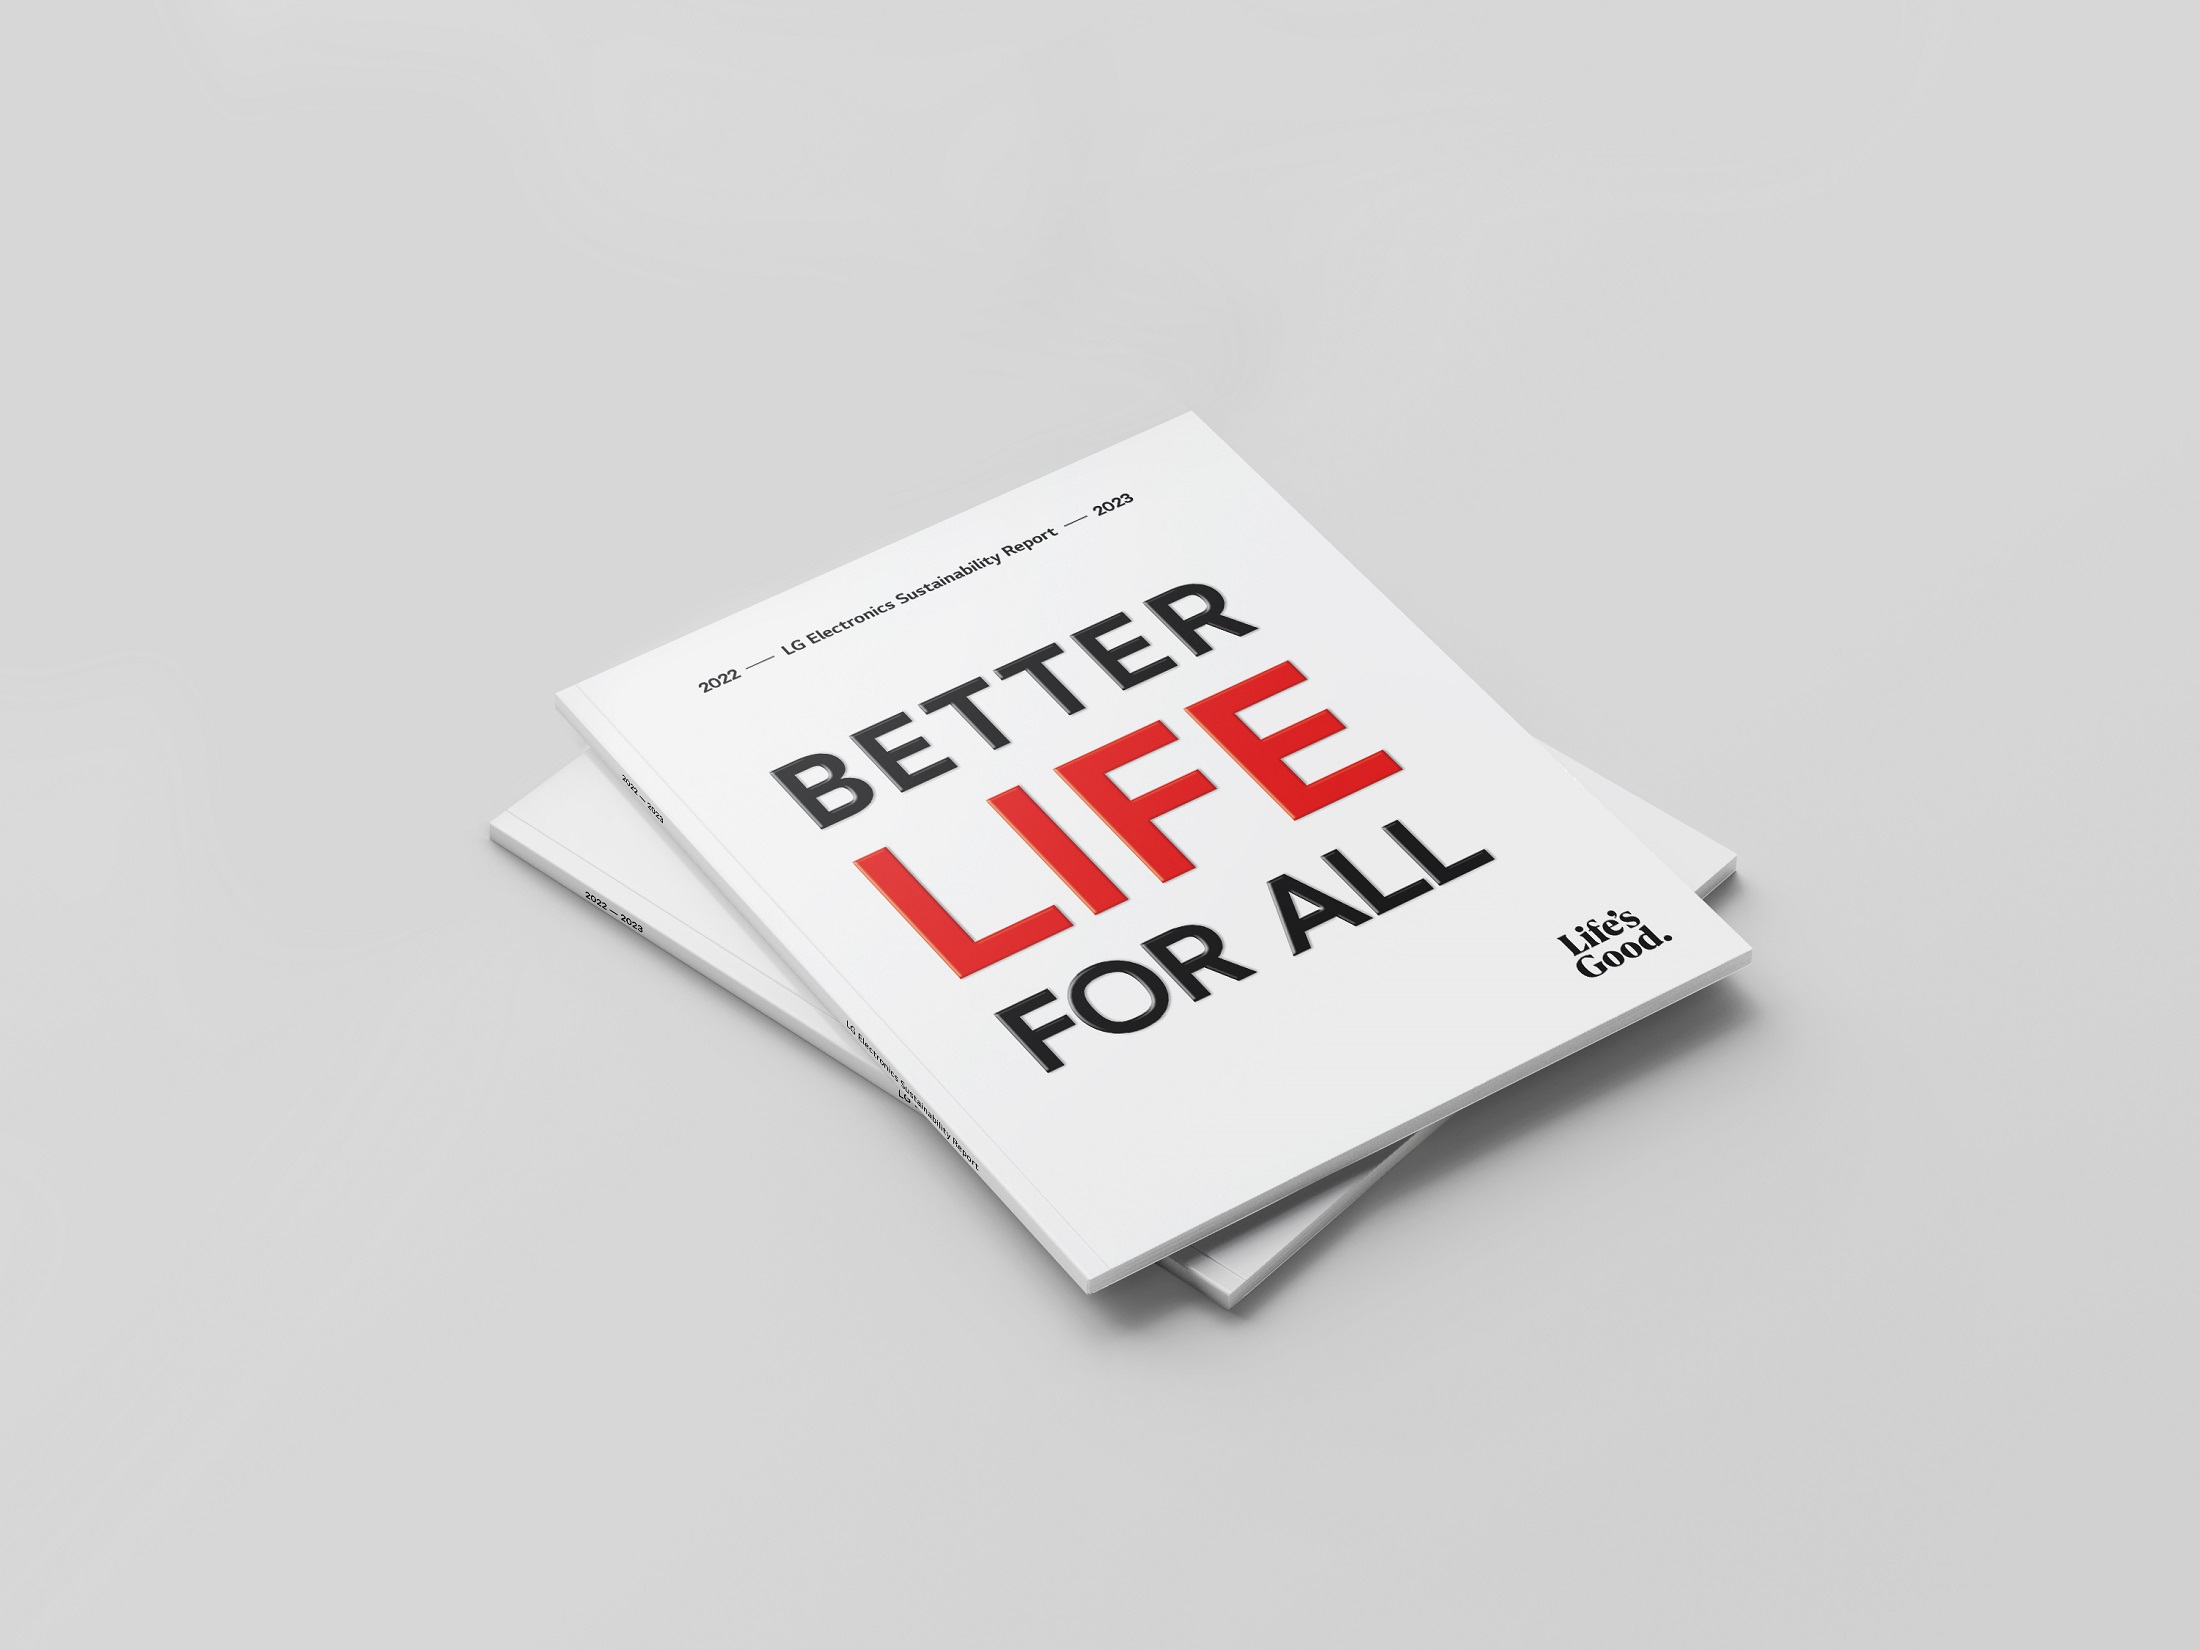 An illustration of a book titled 'BETTER LIFE FOR ALL'